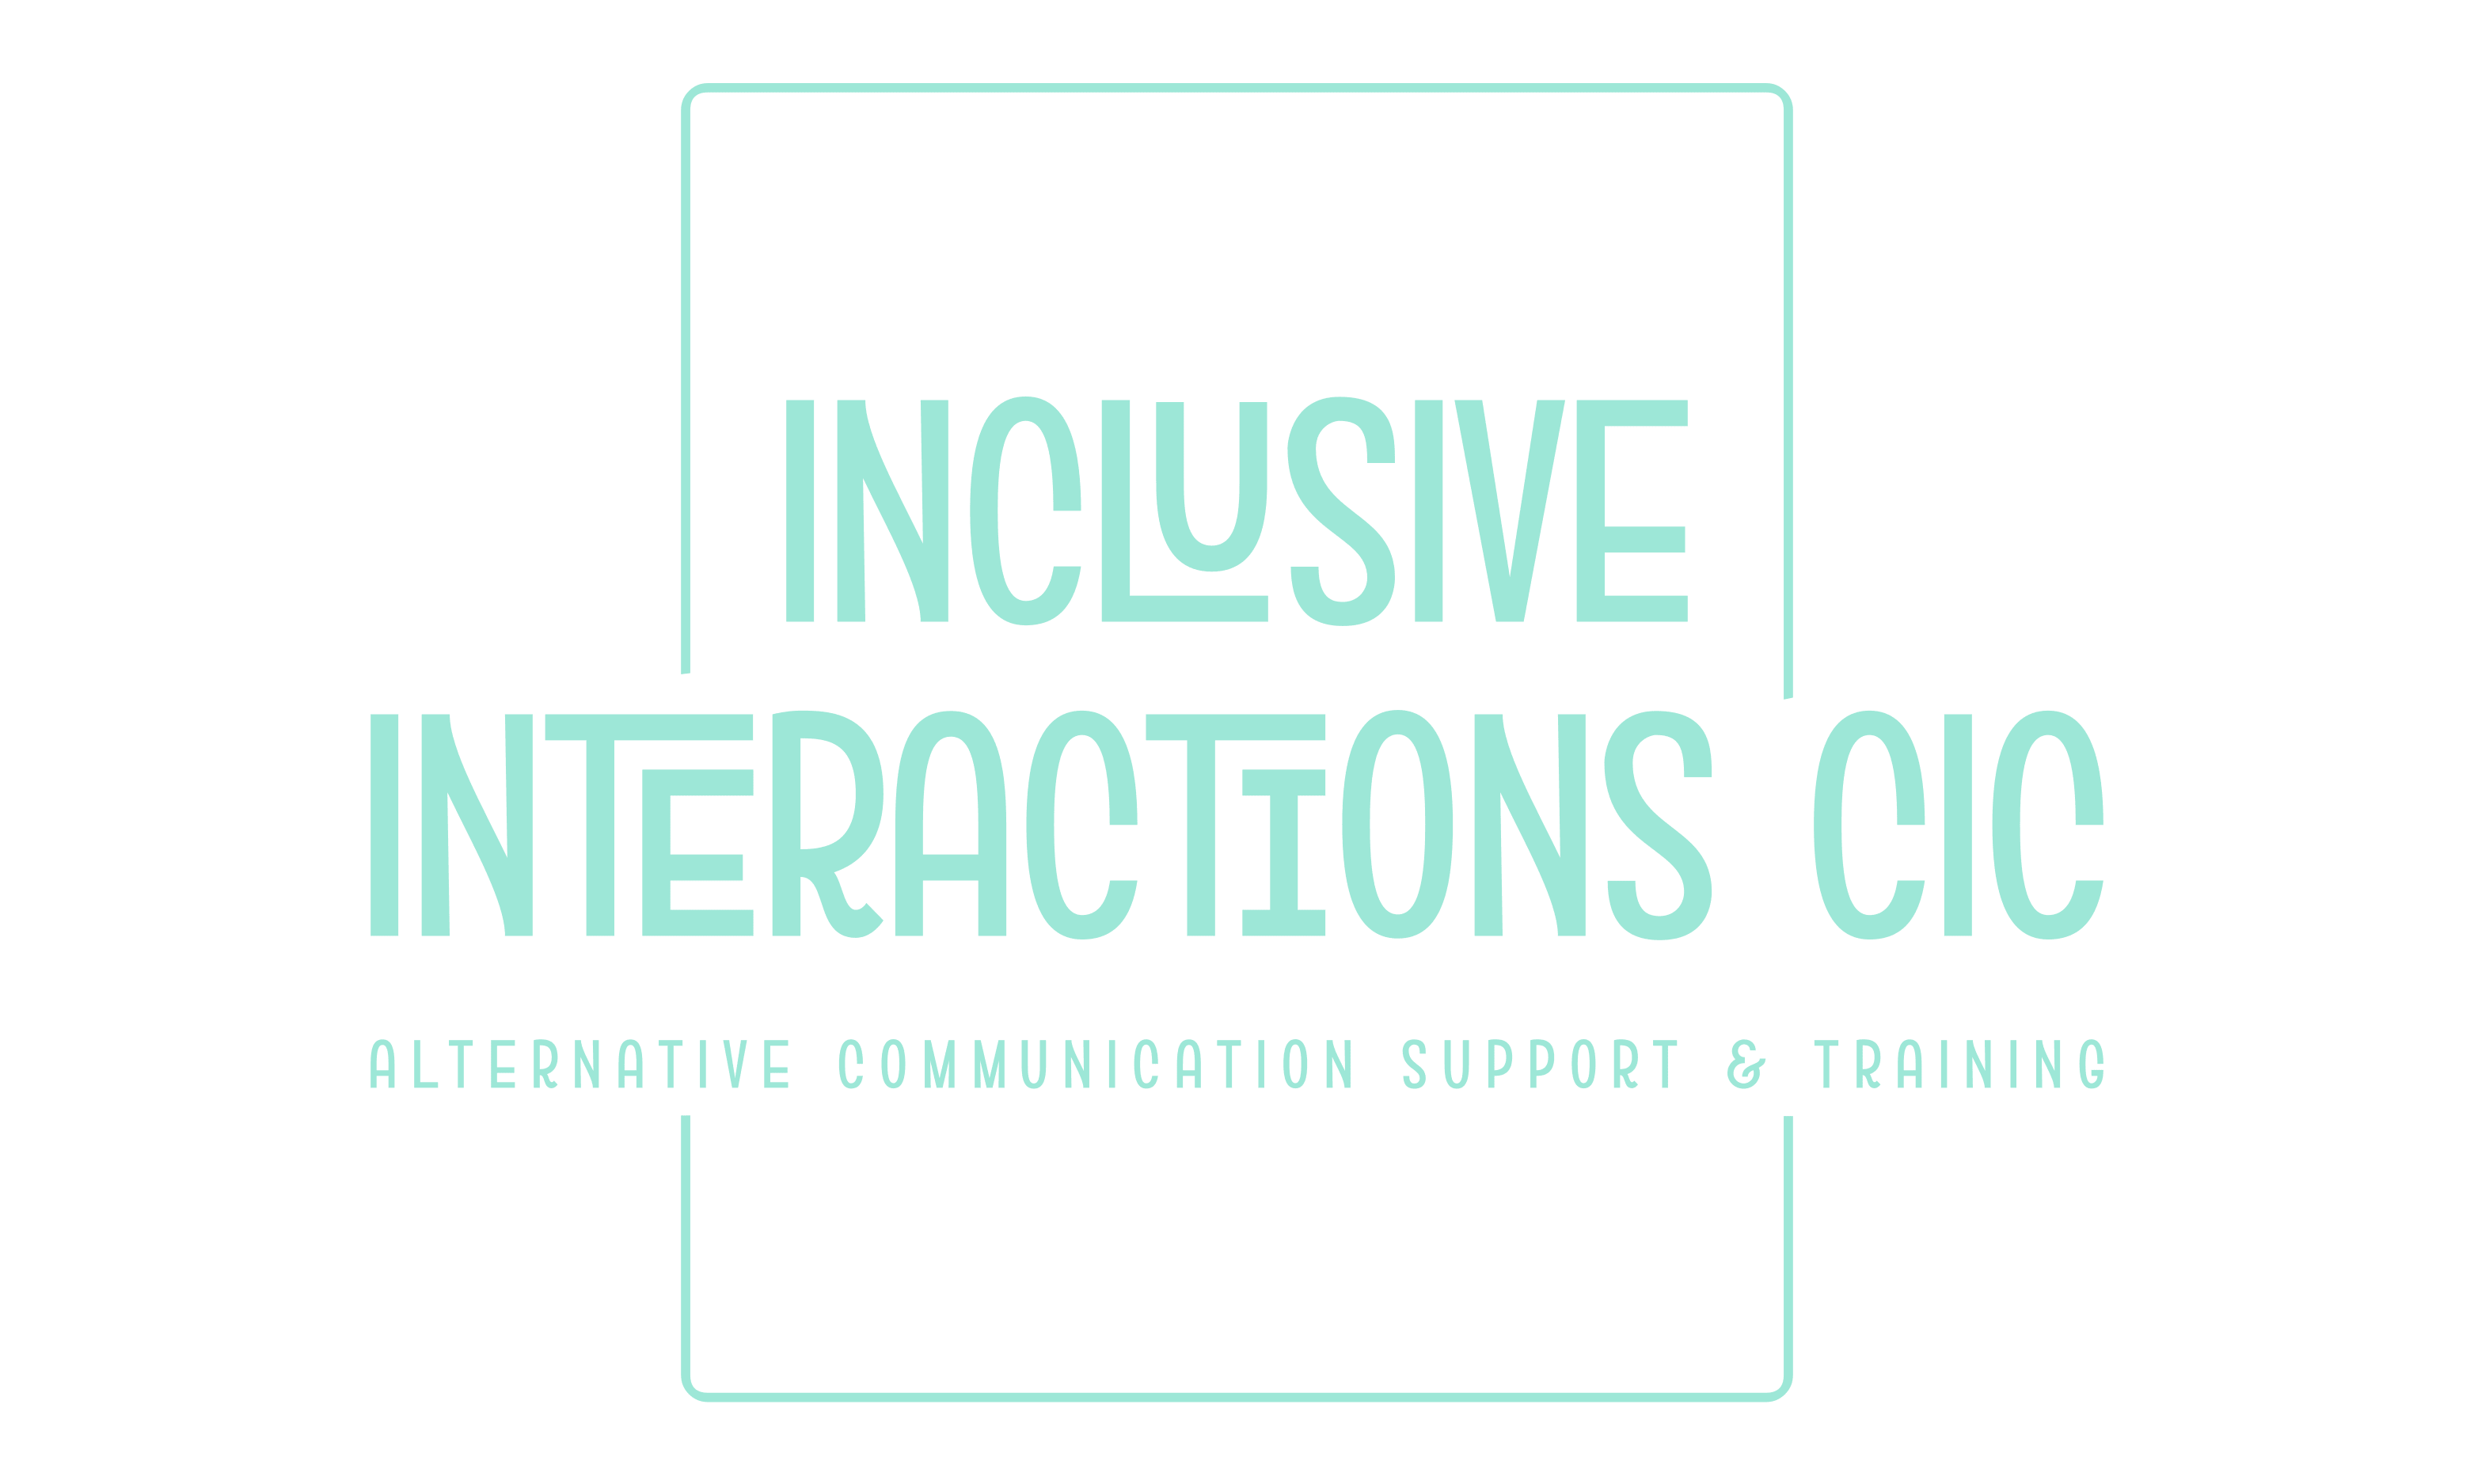 Inclusive Interactions CIC